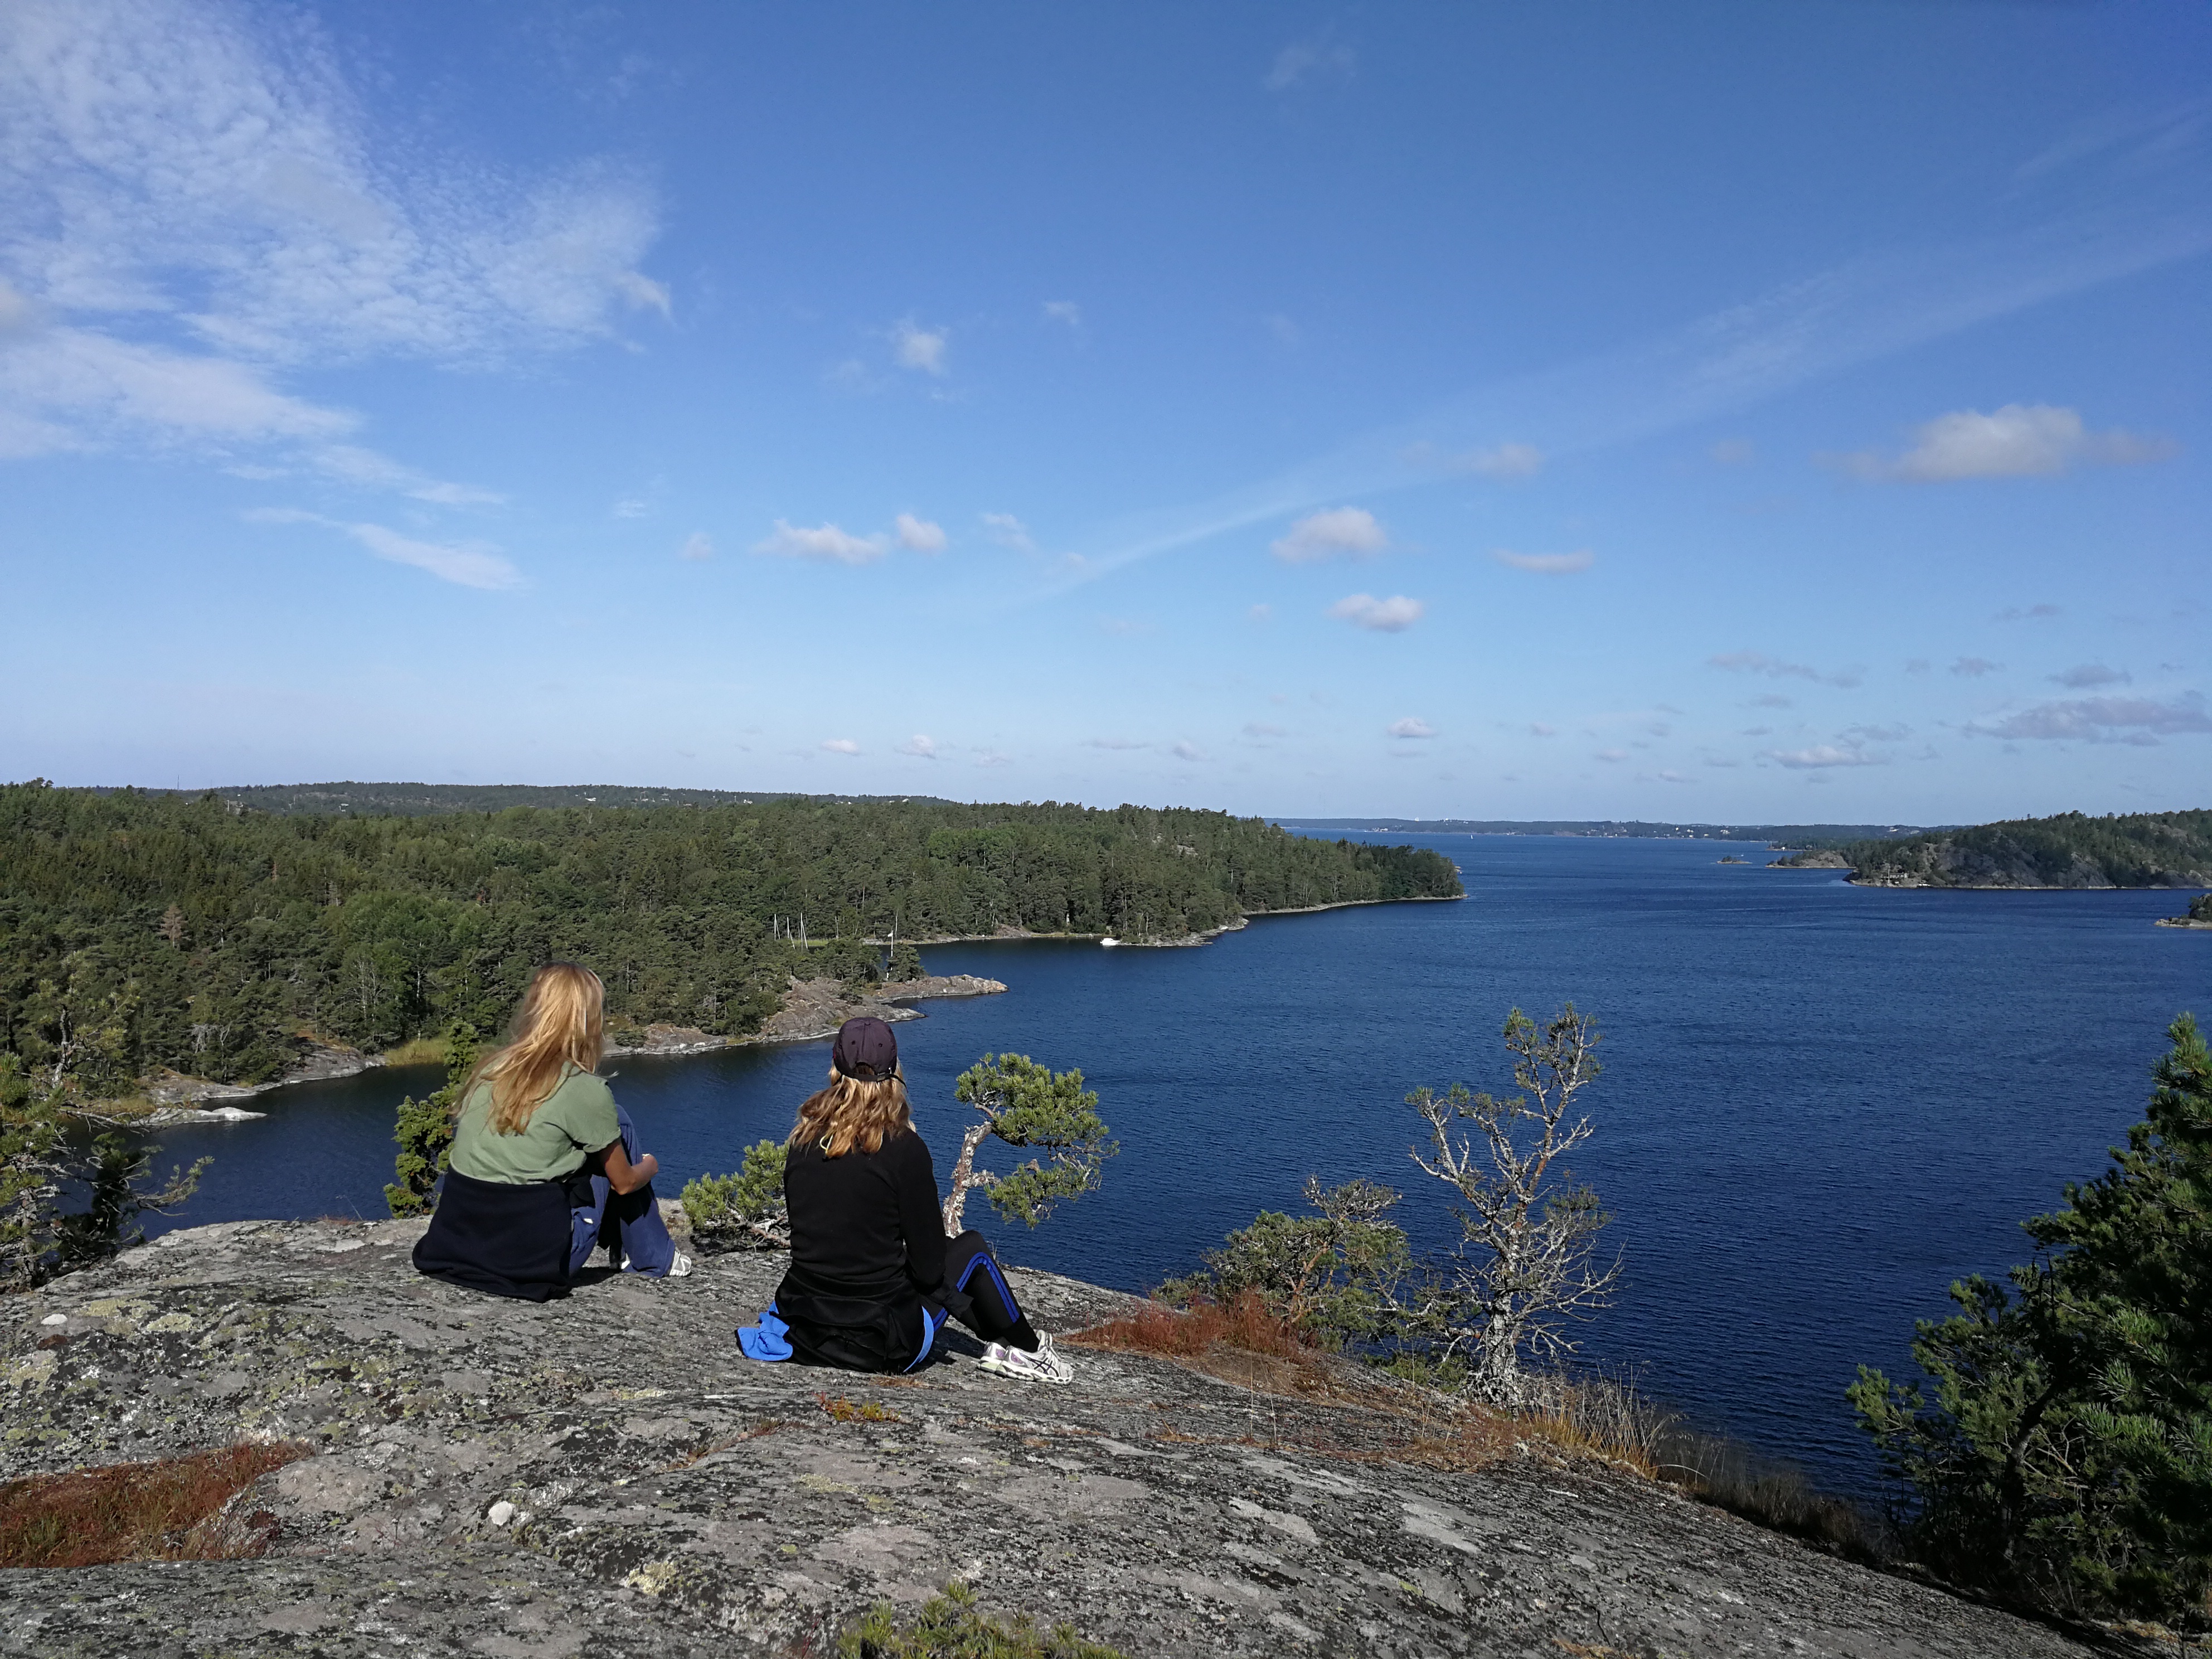 Early morning hikes on Swedish islands